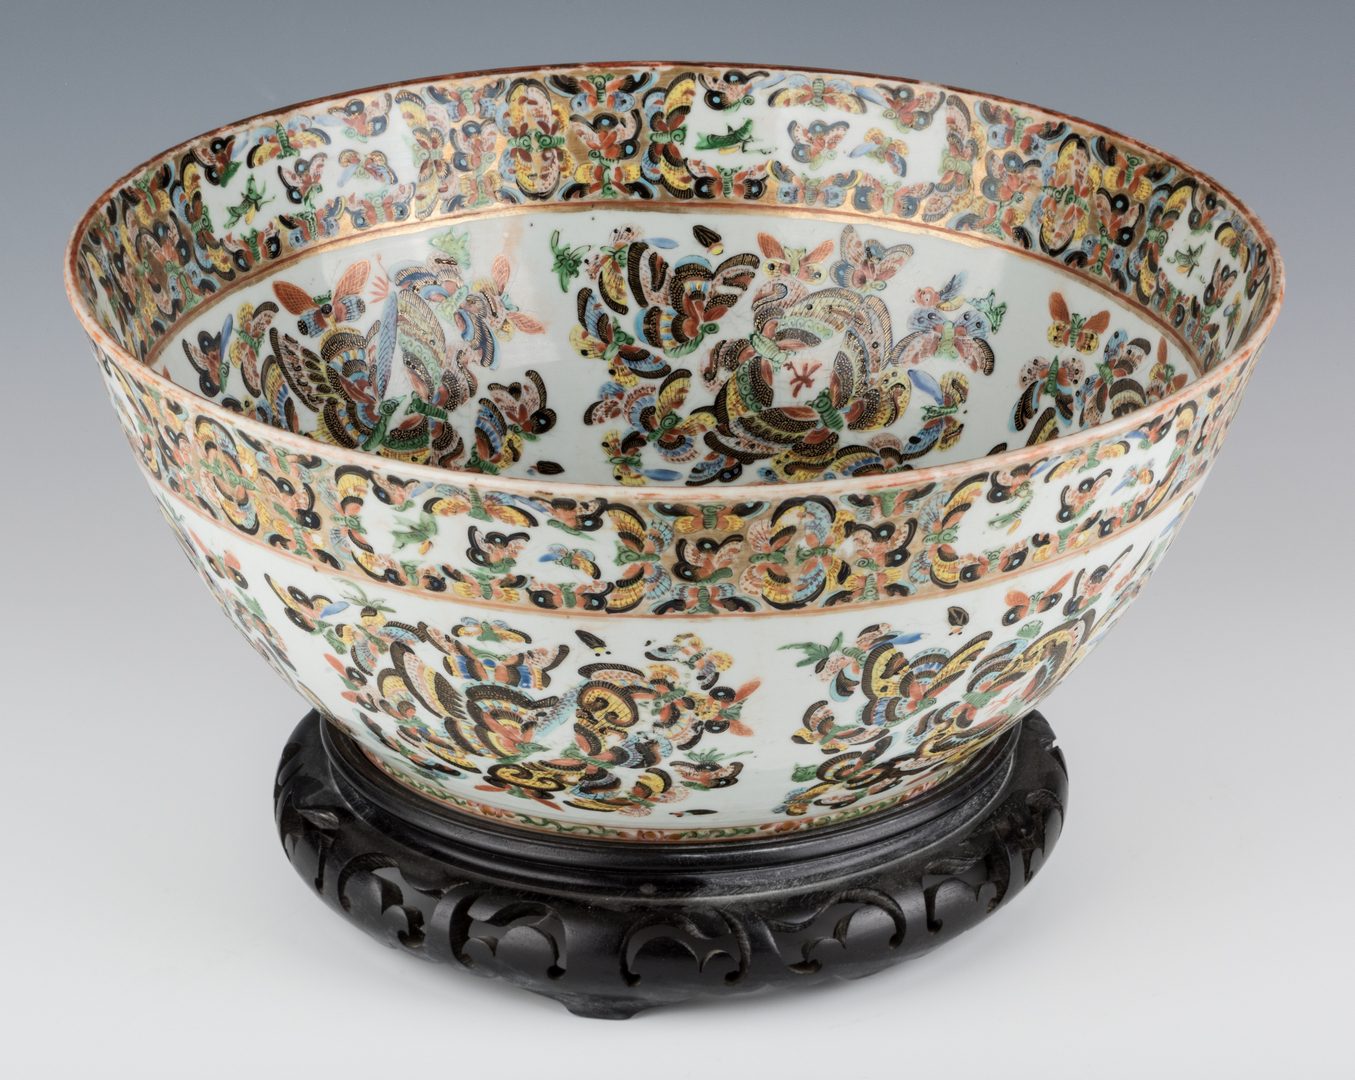 Lot 23: Chinese Export 1000 Butterflies Punch Bowl